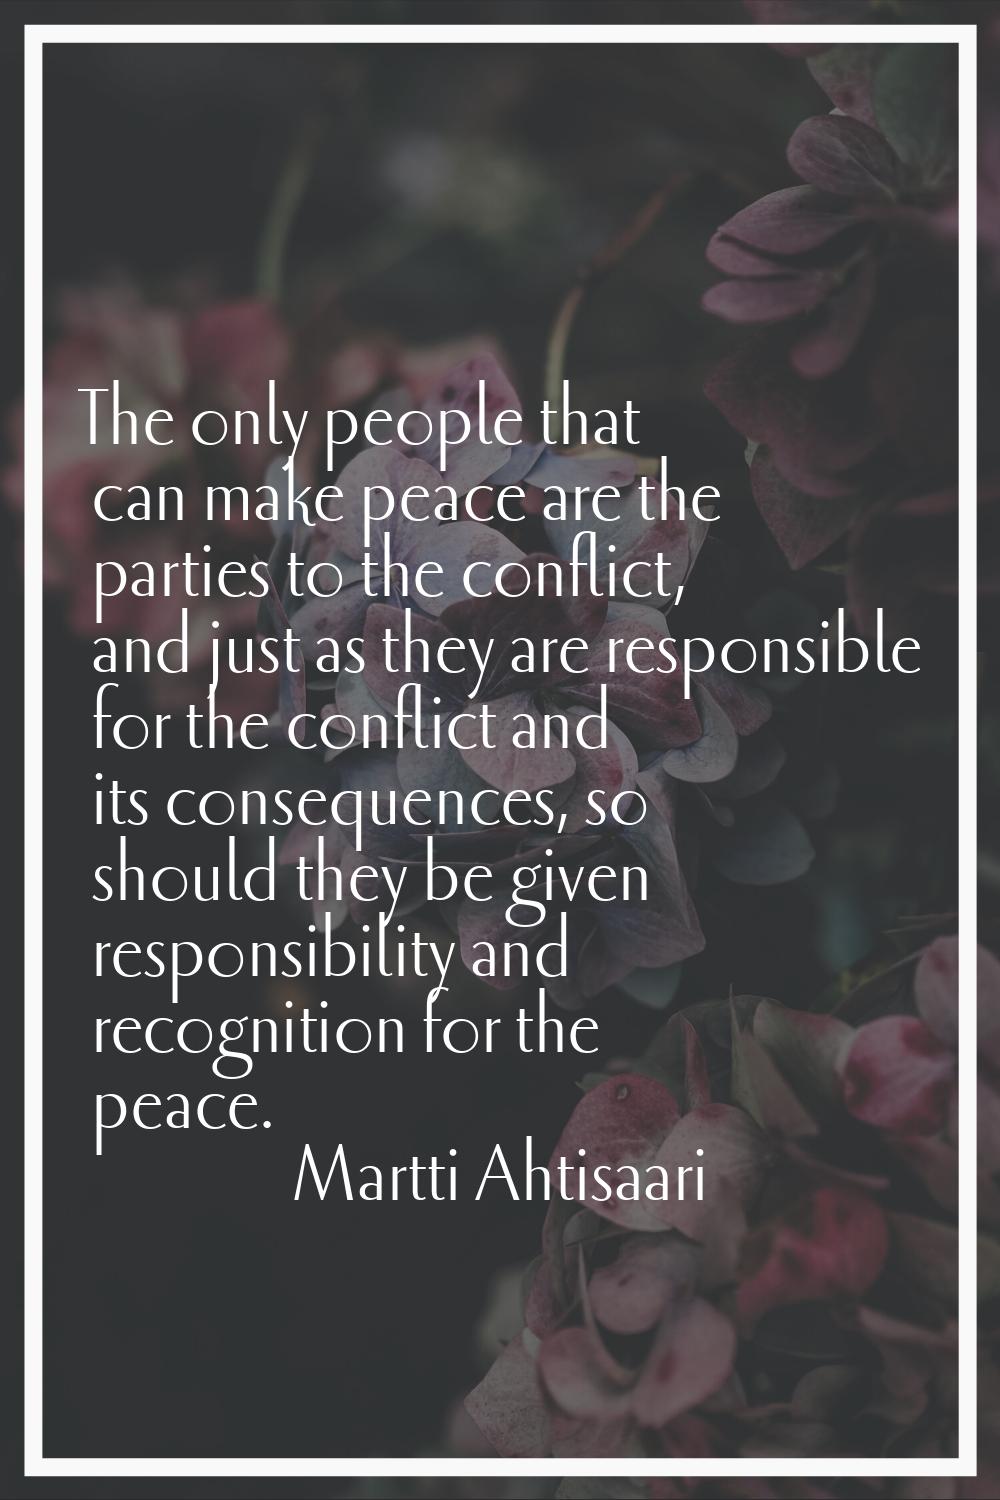 The only people that can make peace are the parties to the conflict, and just as they are responsib